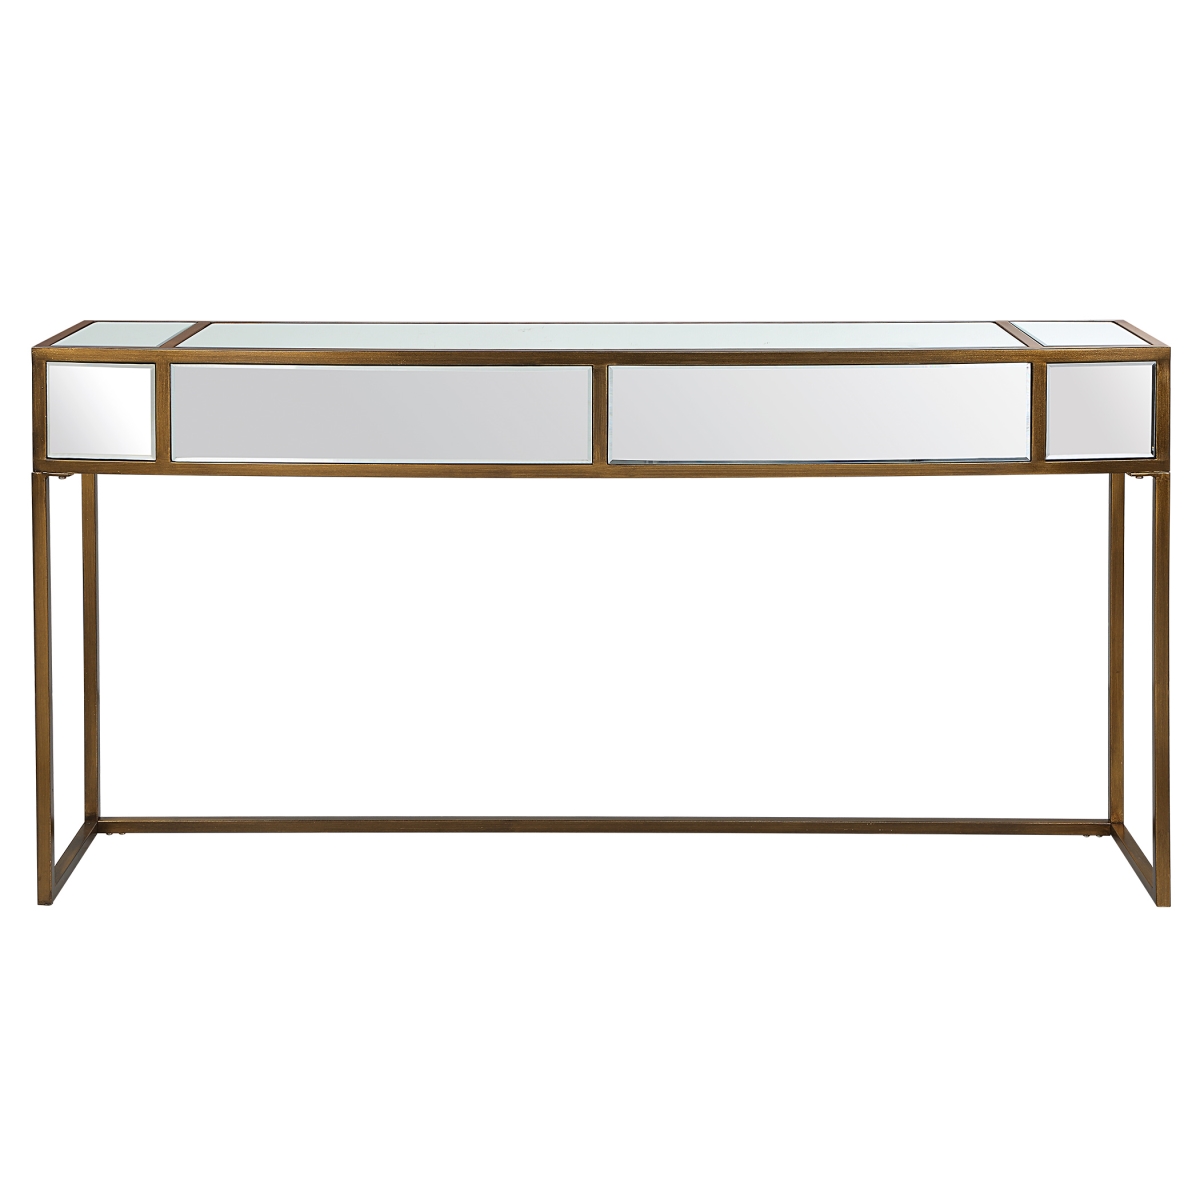 25286 62 in. Reflect Wall Mirrored Console Table, Brushed Aged Gold -  Uttermost